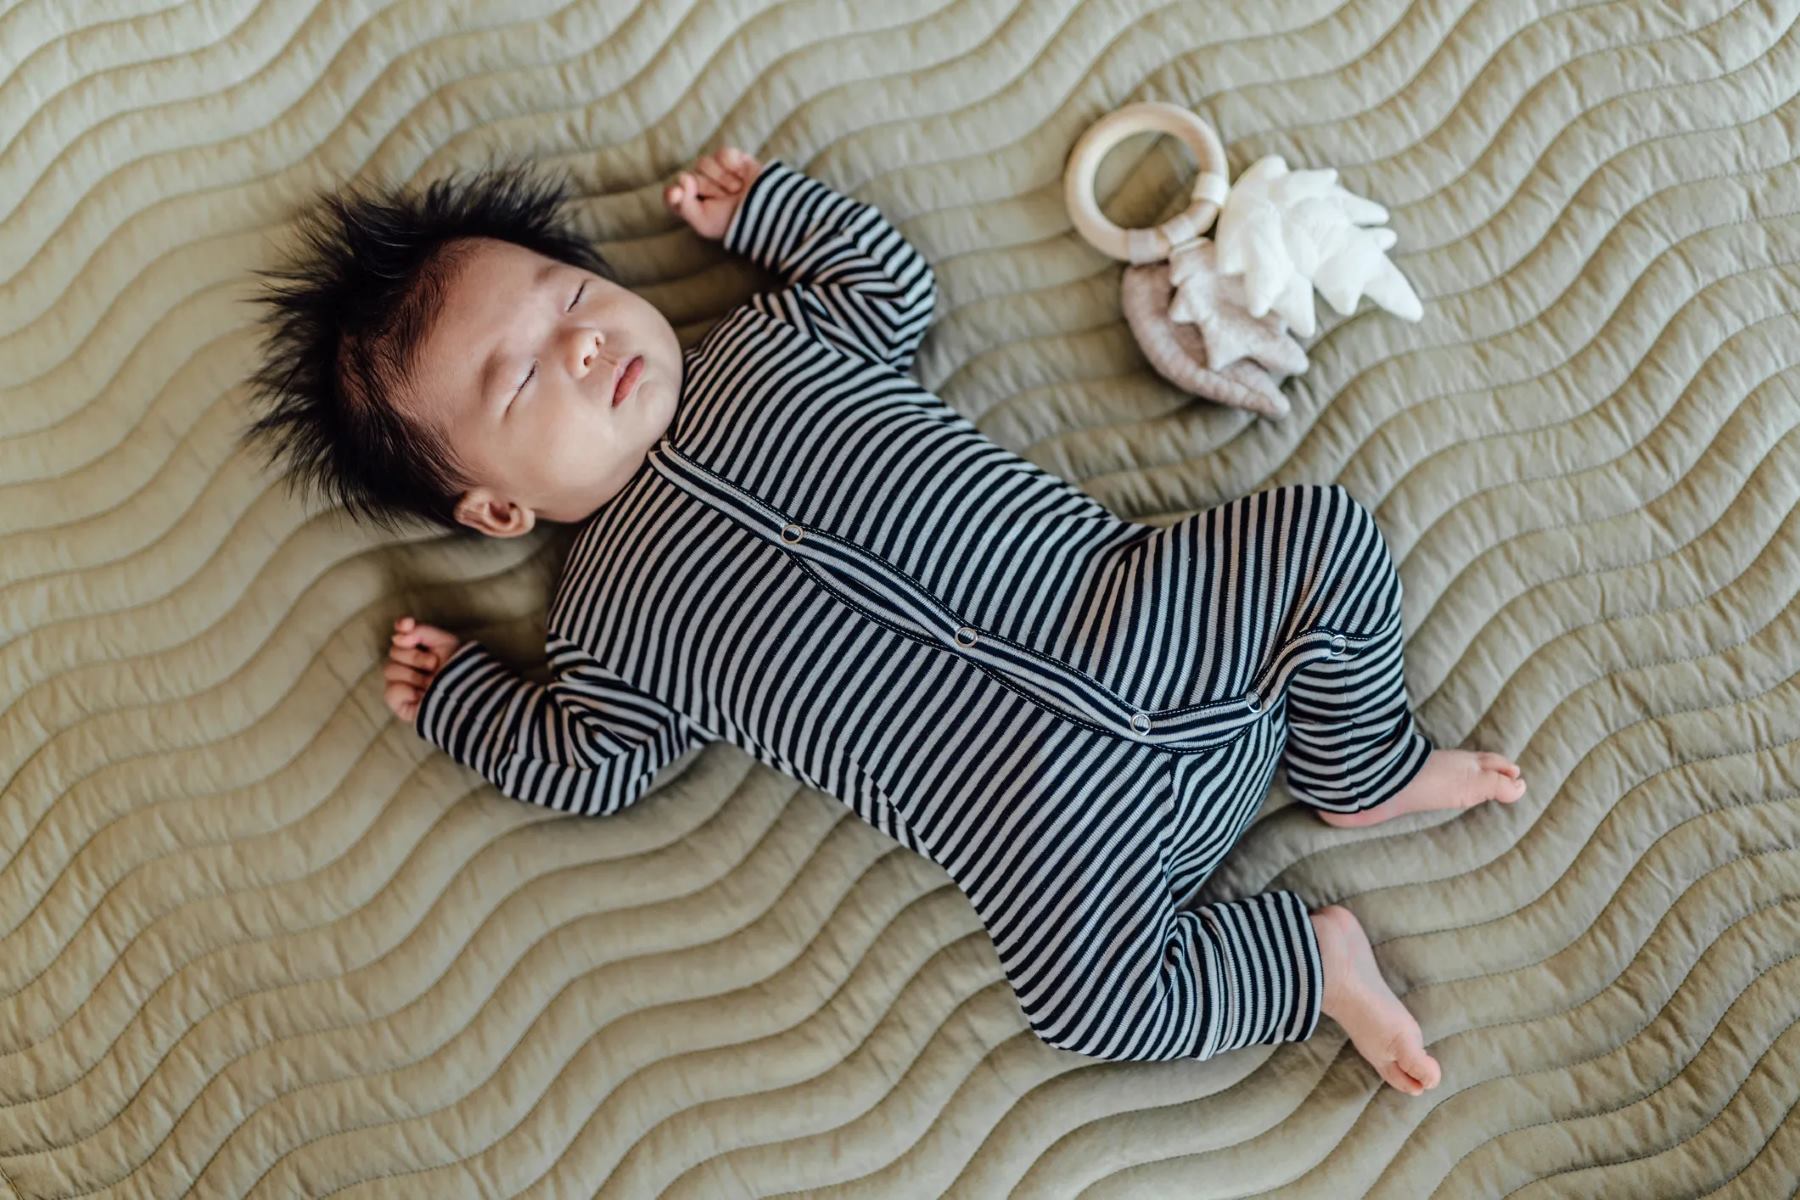 Review: Best Baby Sleepwear Set for a Peaceful Night’s Sleep